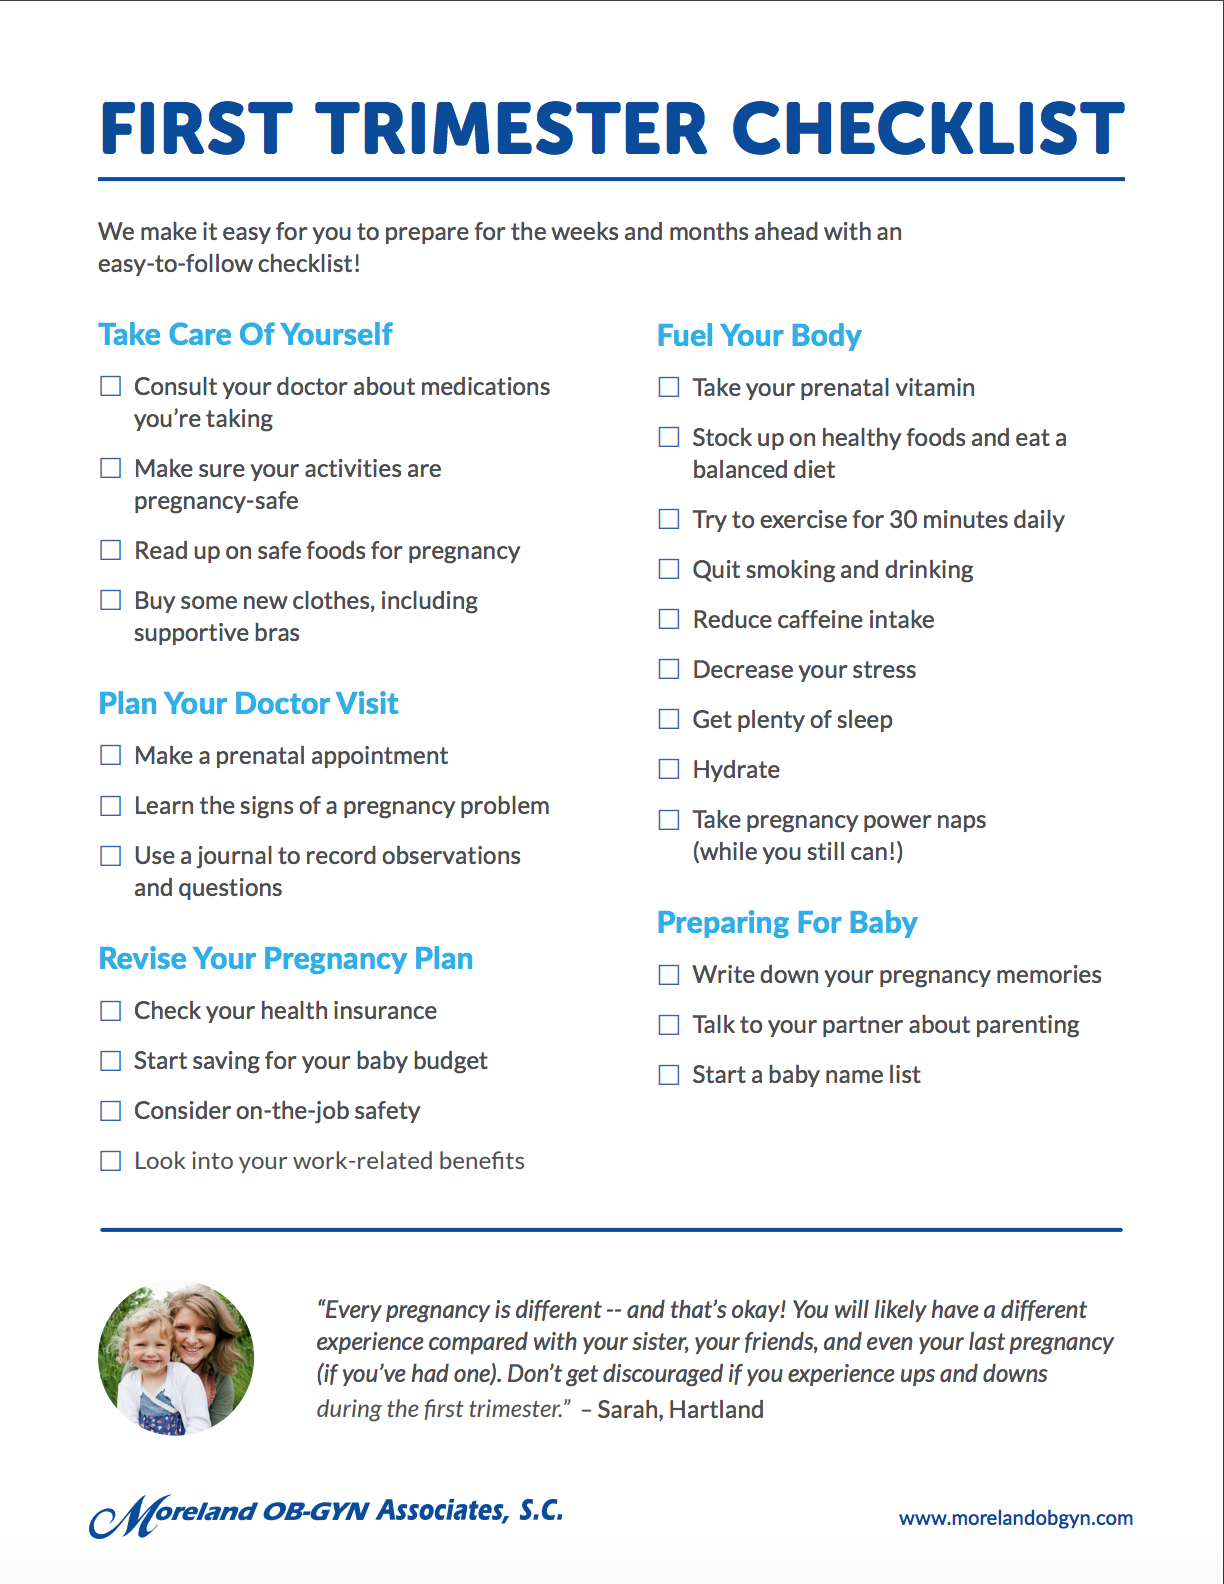 Preparing for Pregnancy? Here Are Some Tips on Pre Pregnancy Diet, Genetic  Tests and Other Checklist Items